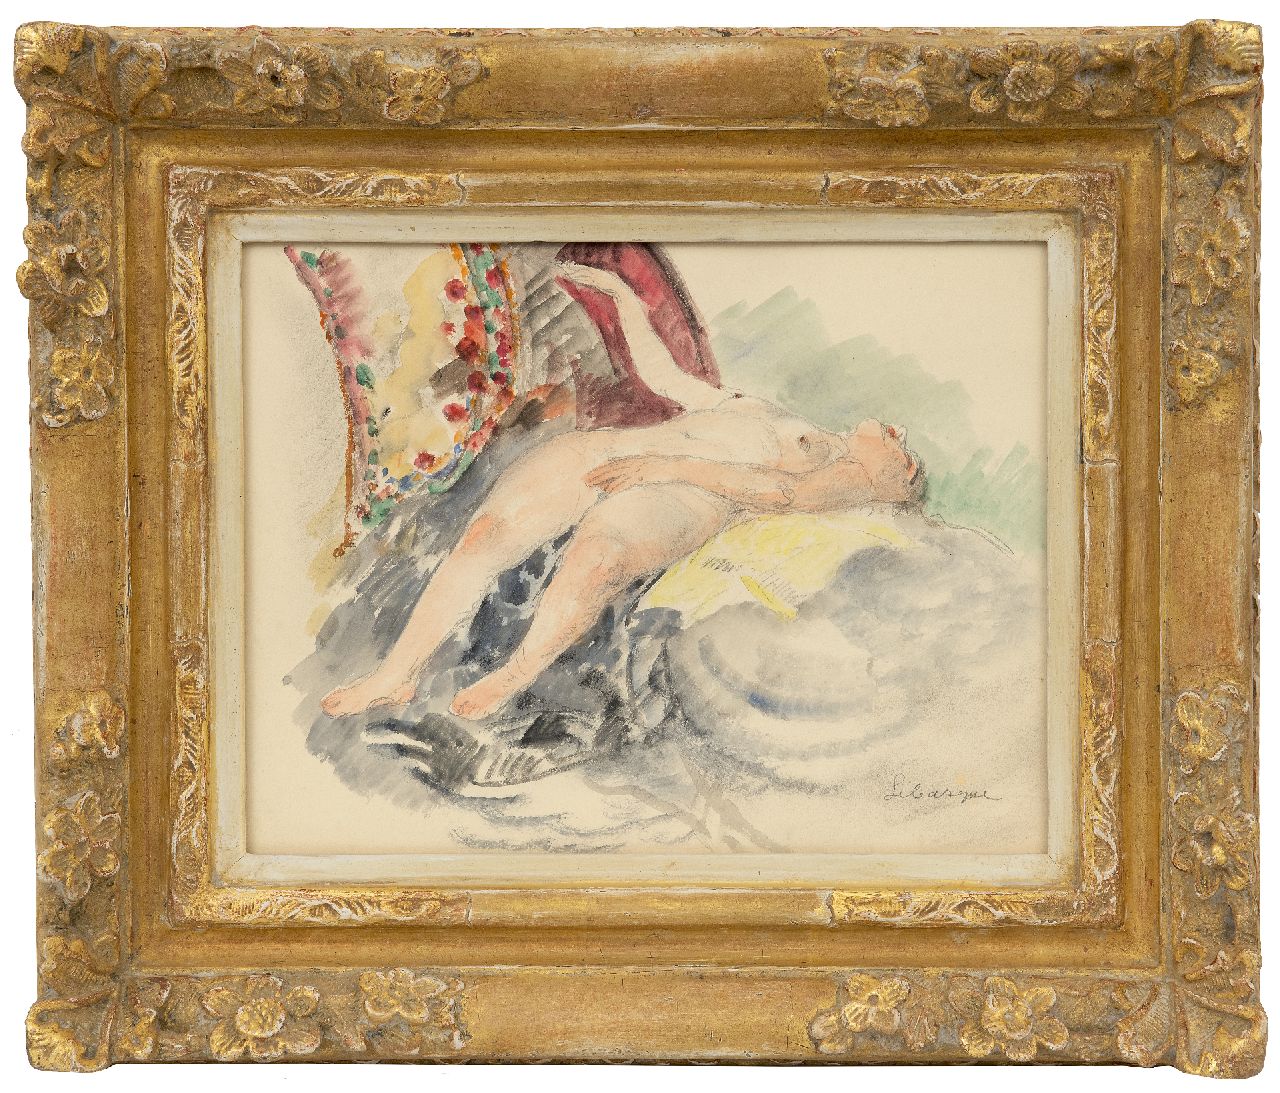 Lebasque H.  | Joseph 'Henri' Baptiste Lebasque | Watercolours and drawings offered for sale | Nu au Canapé (Nude on the sofa), pencil and watercolour on paper 21.5 x 27.5 cm, signed l.r.